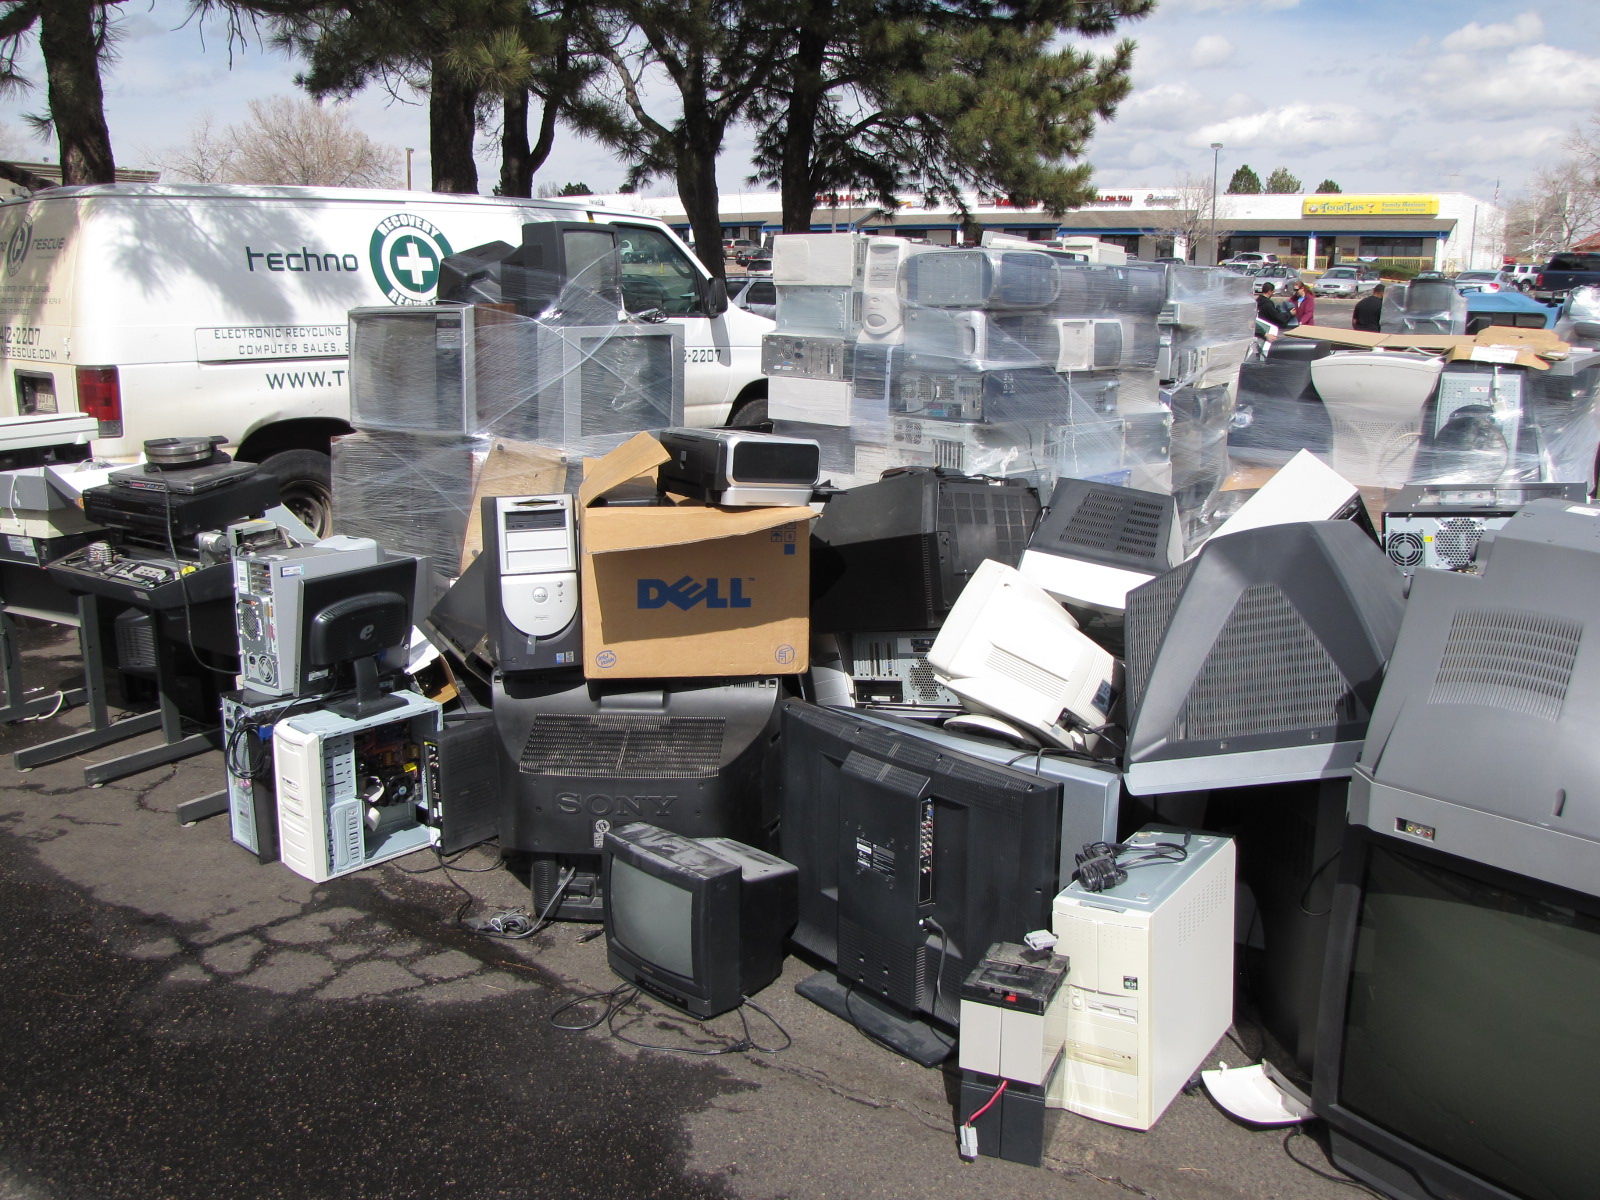 Nearly 90,000 lbs. of electronics were recycled On Havana Street after the 2013 Colorado floods.